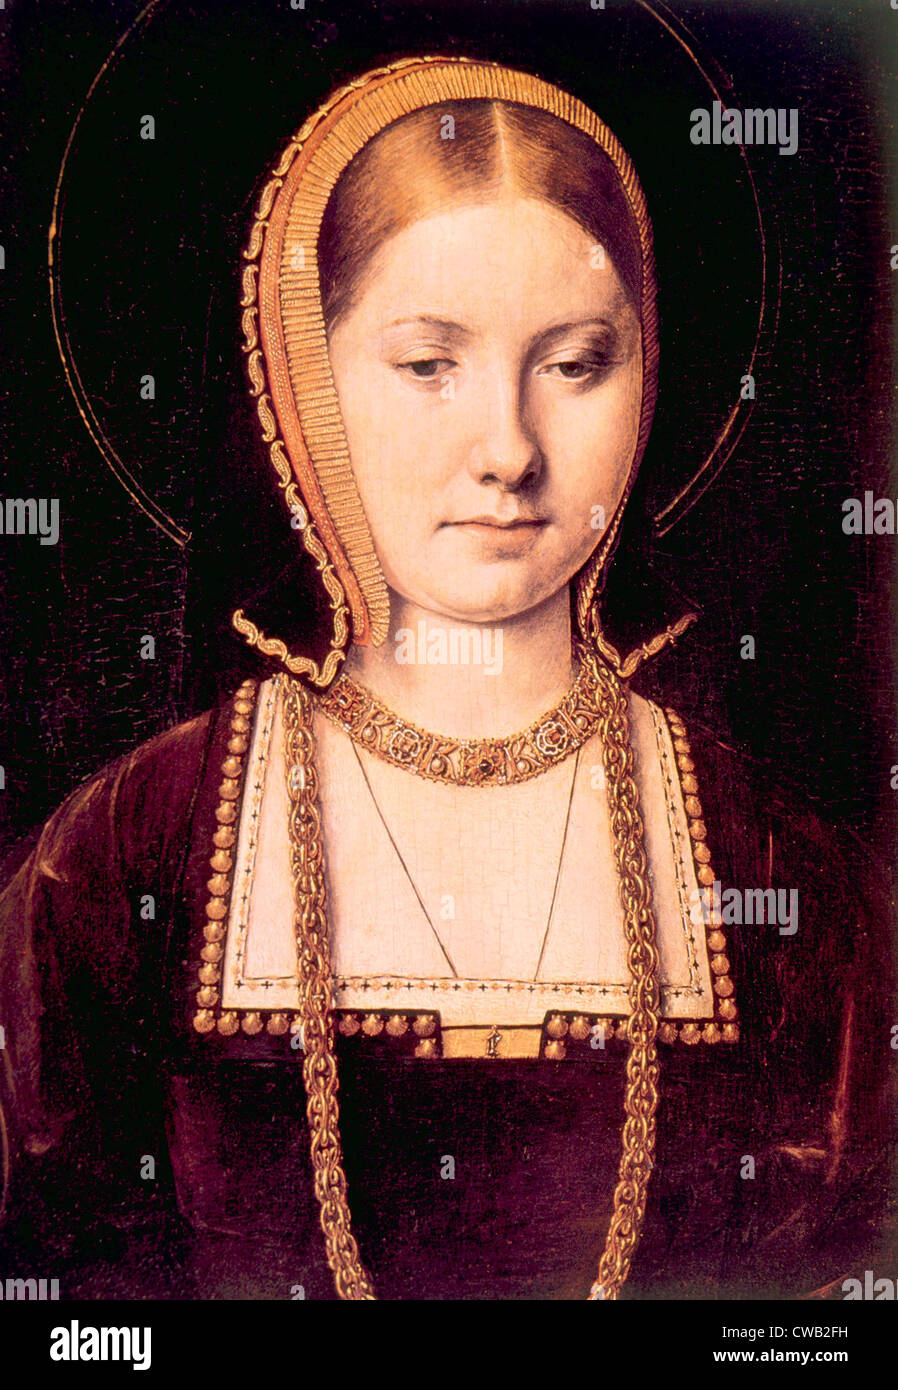 Queen Katherine of Aragon (1485-1536), first wife of King Henry VIII (1491-1547). Painting by Michael Sittow. Stock Photo